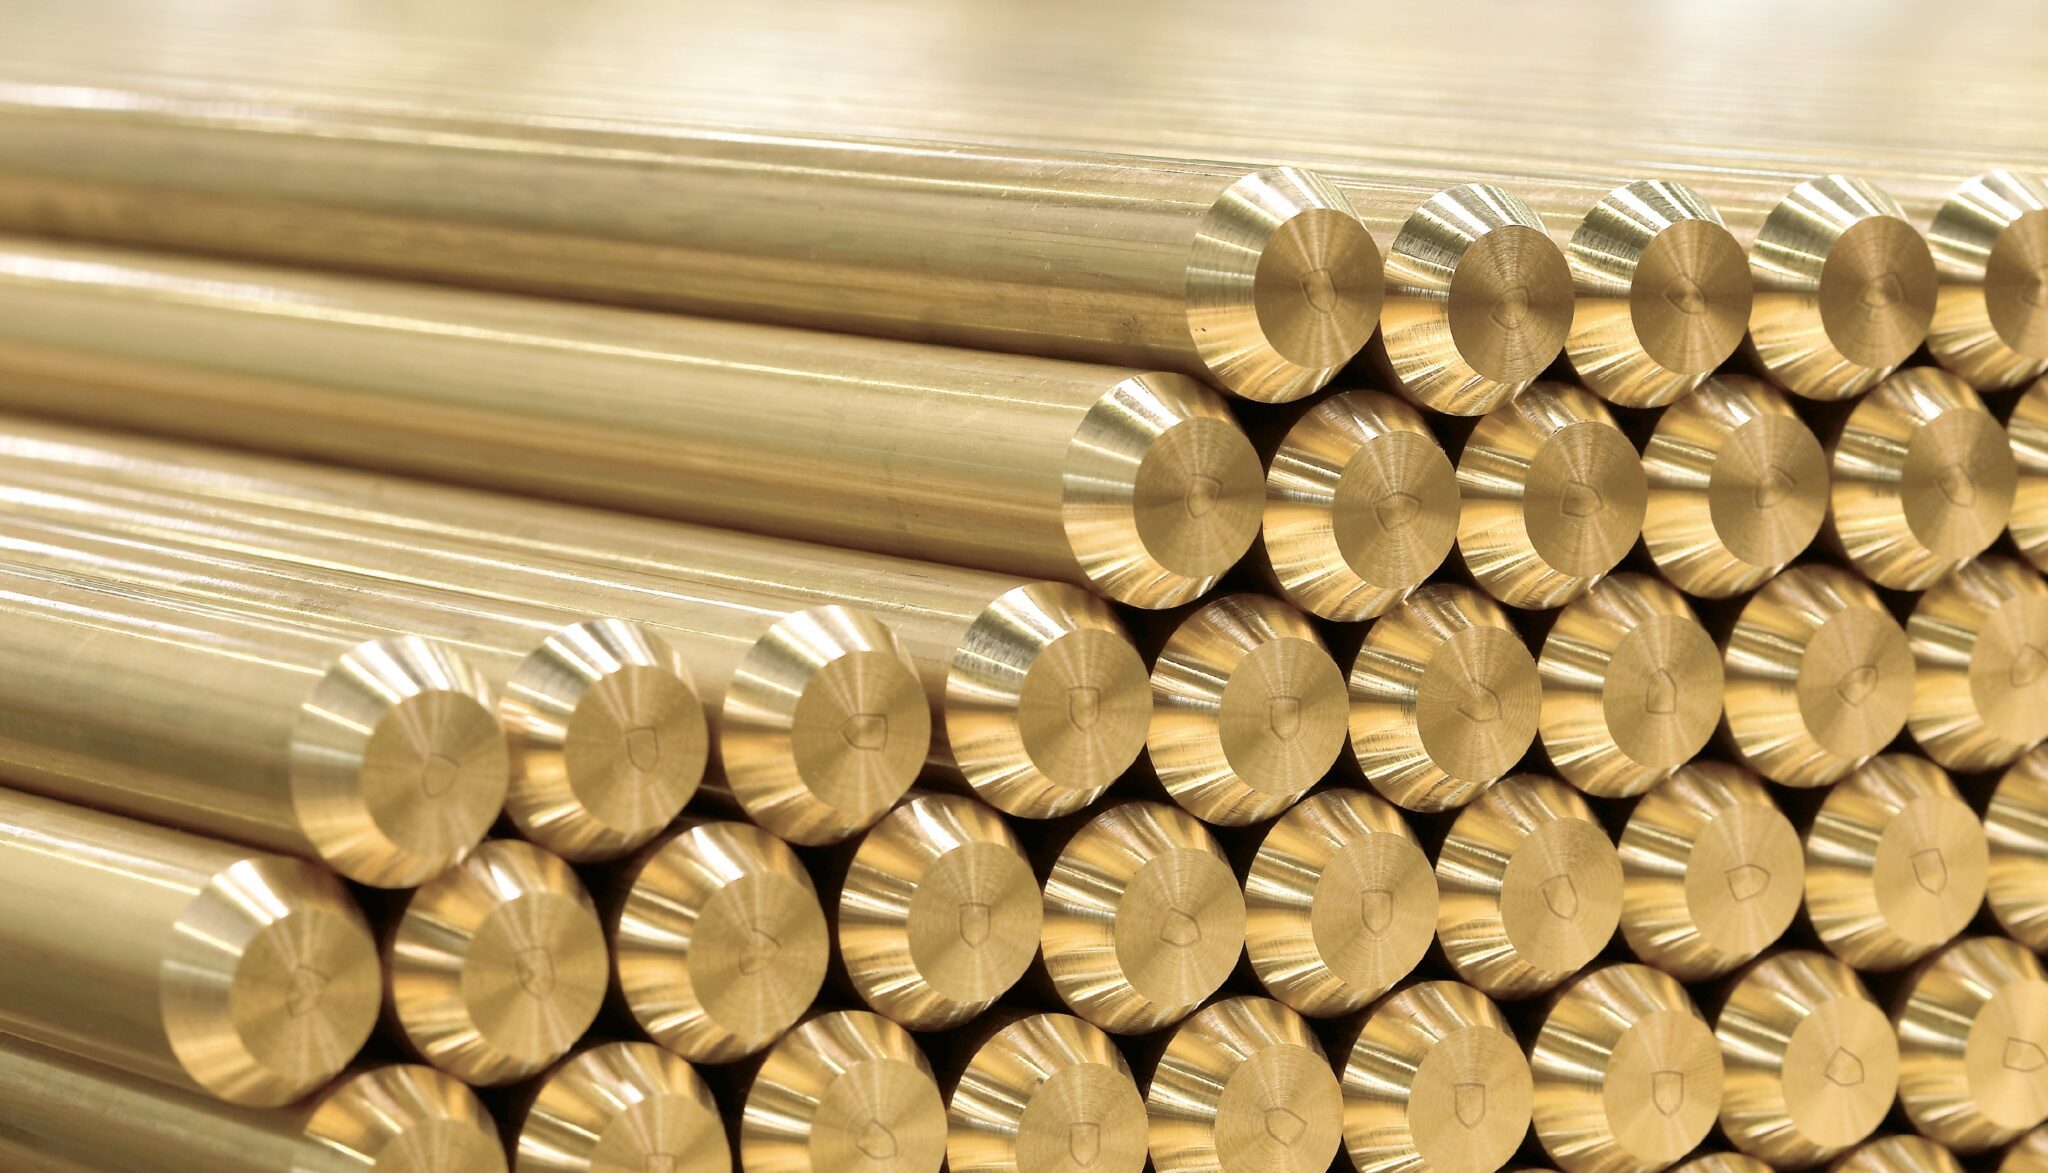 The Wieland Group sets new standards in lead-free brass machining, forming, and efficiency with the new SZ product family, specifically the eco SZ3 alloy.